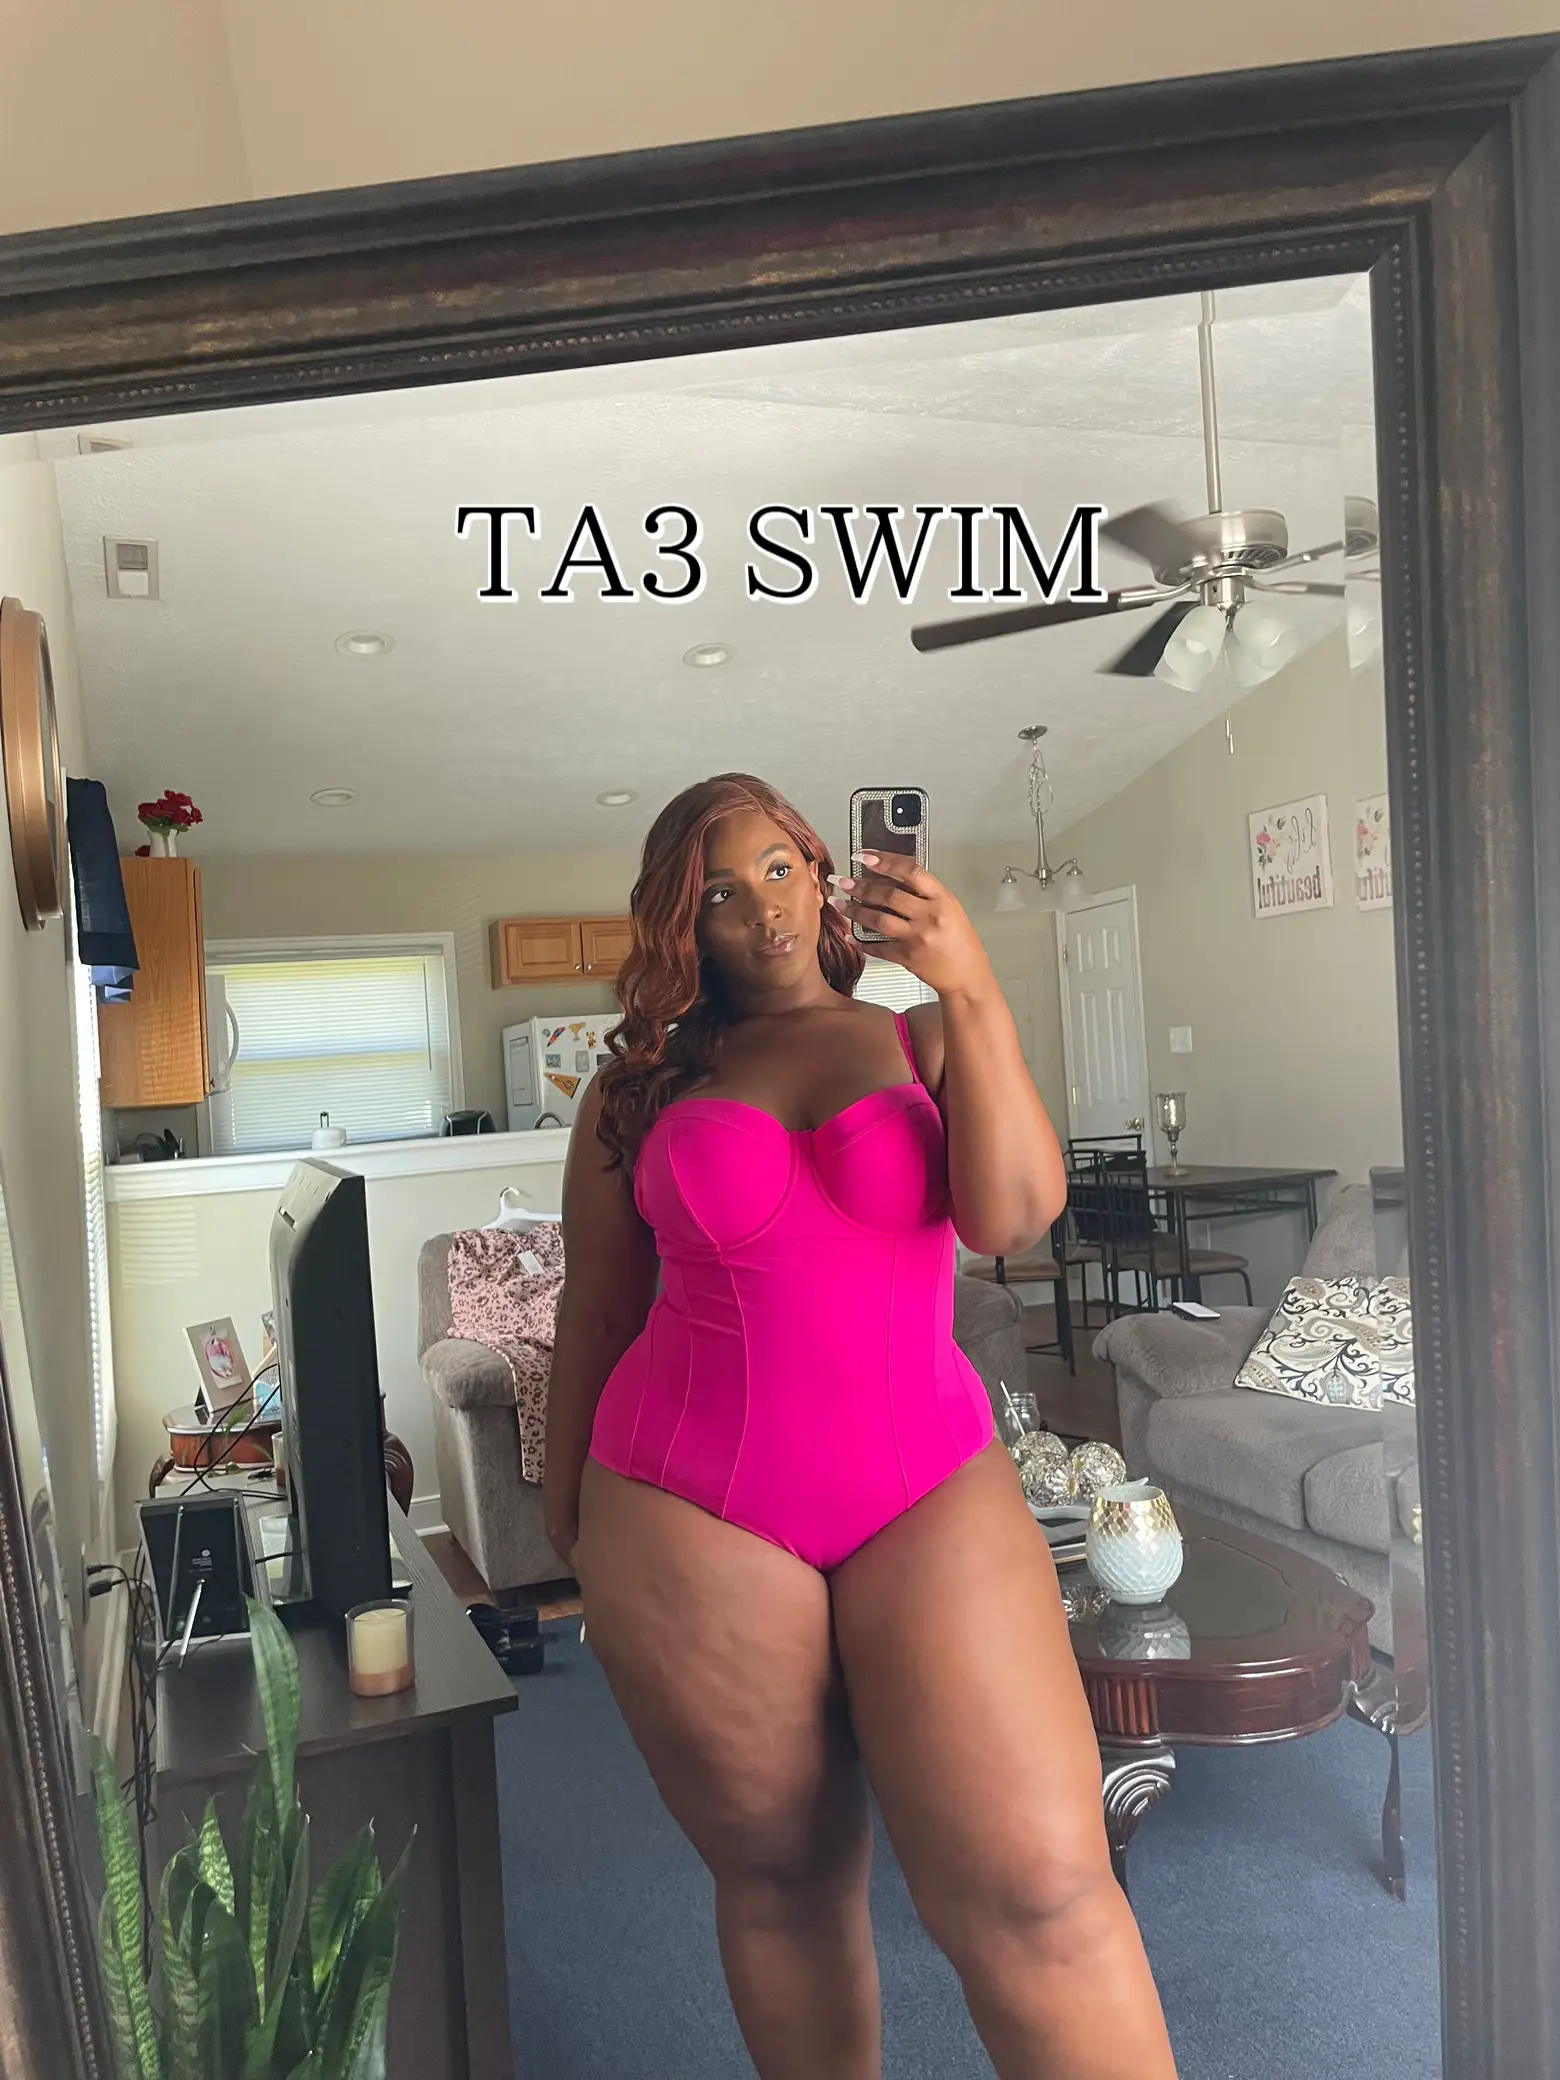 TA3 SWIM-SNATCHED!, Gallery posted by Tandy Shantea